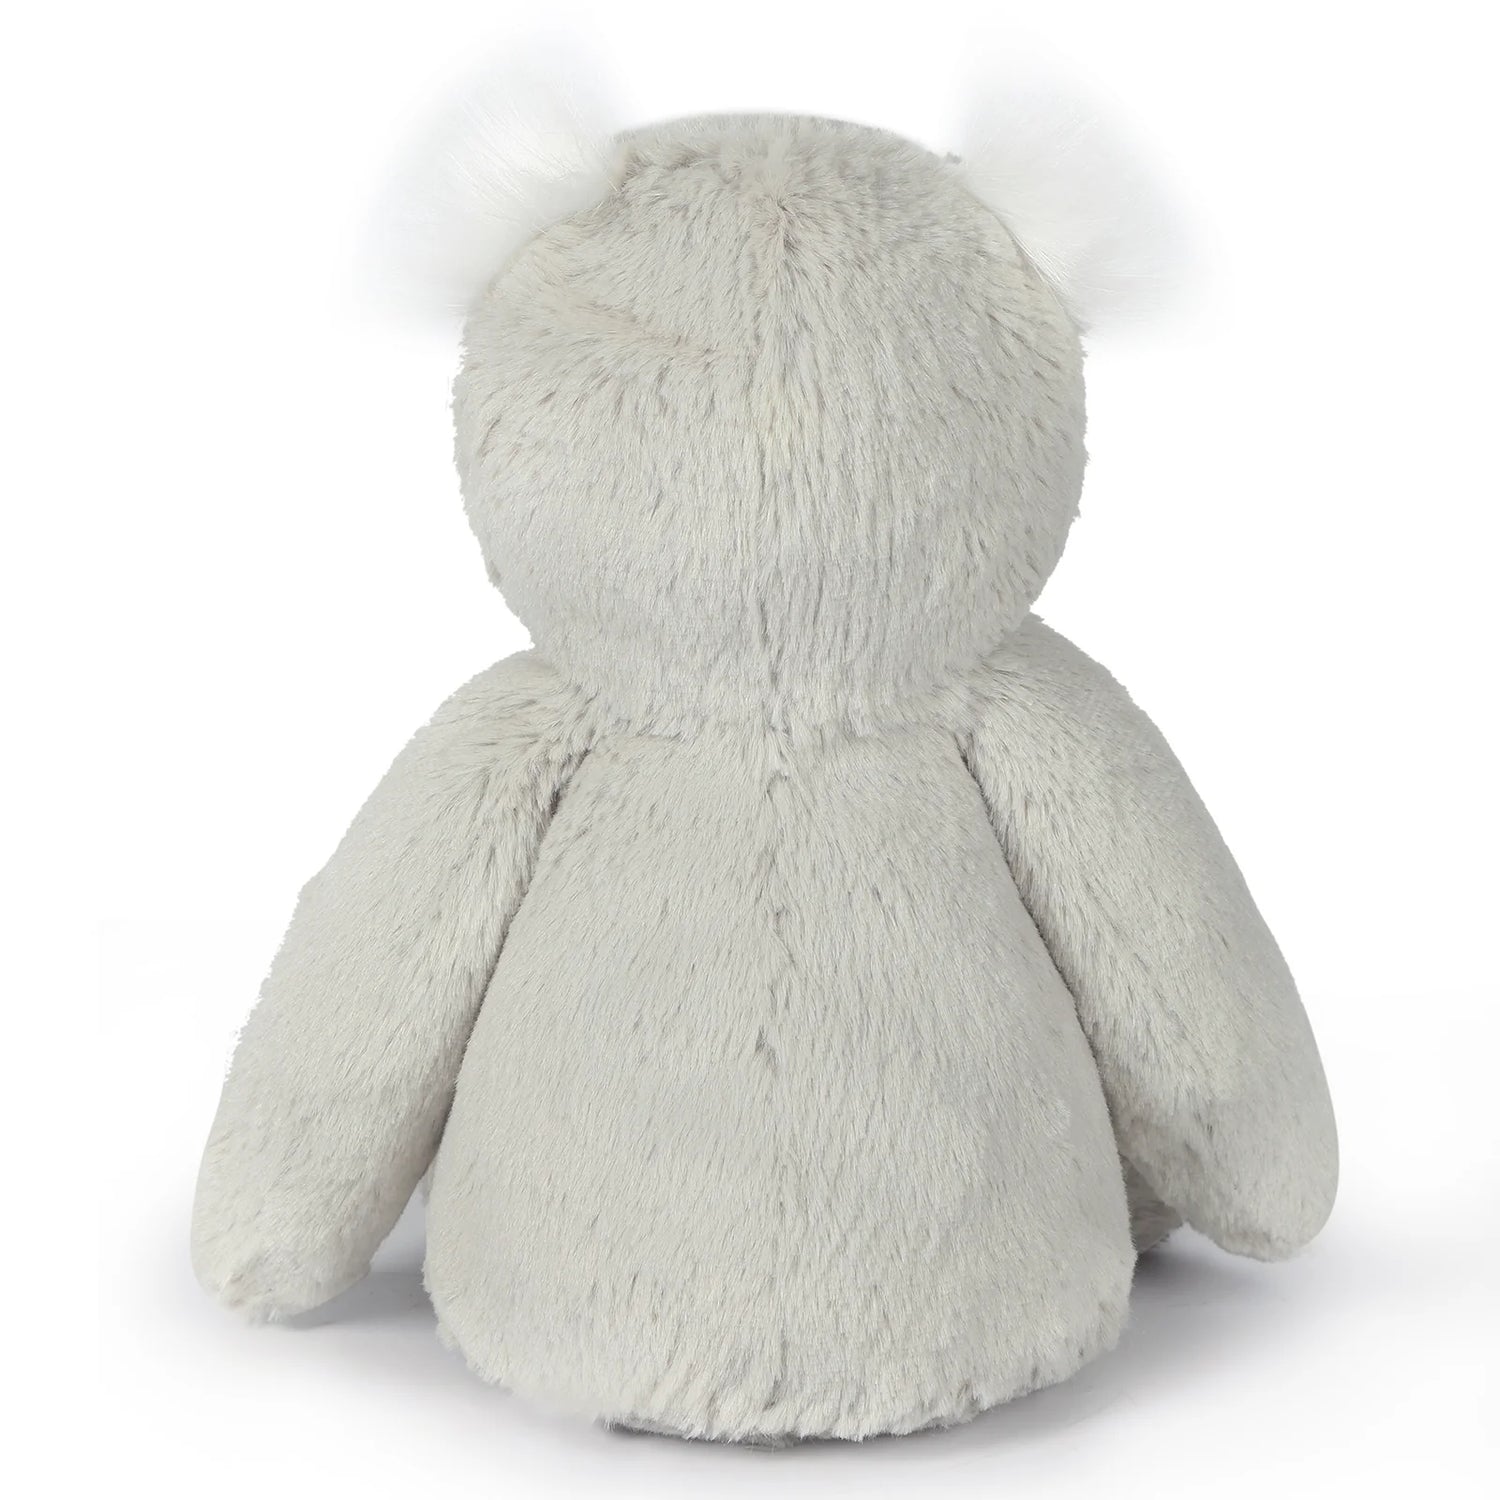 O.B. DESIGNS EVIE OWL SOFT TOY - THE LITTLE EAGLE BOUTIQUE